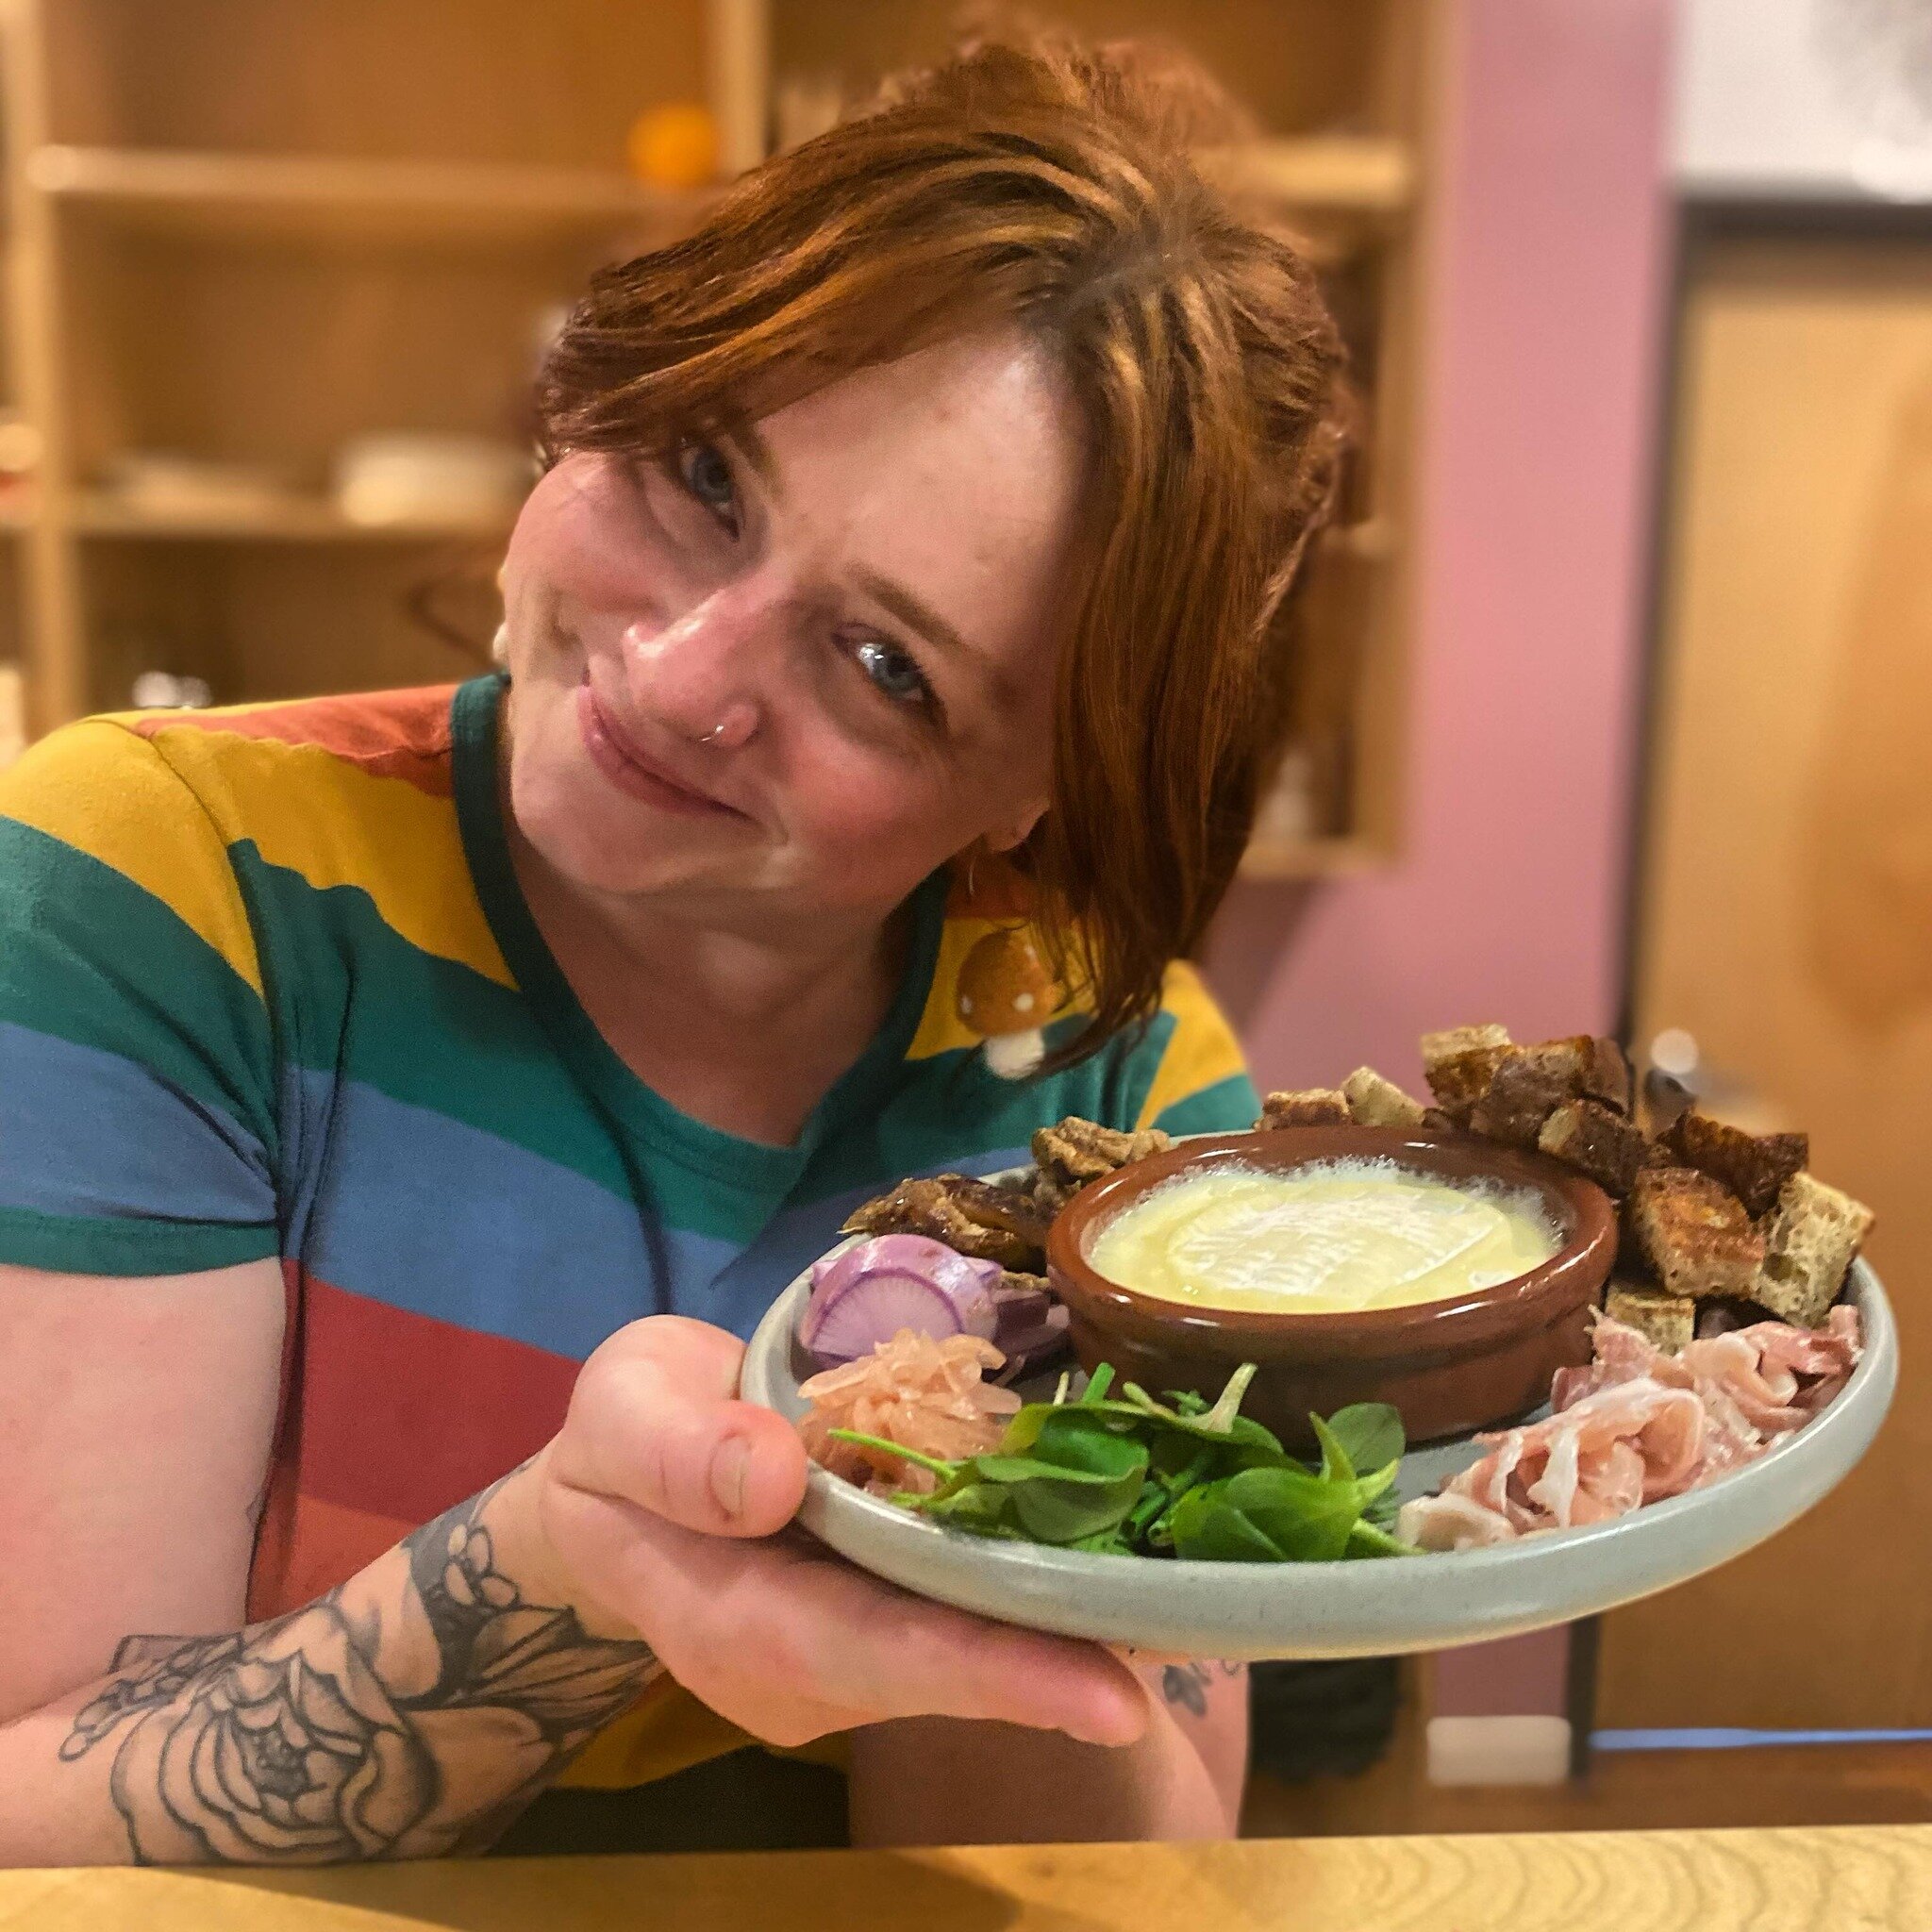 Seating 4-9 Wednesdays!

📸 our baked robiola as presented by Liz 🥳